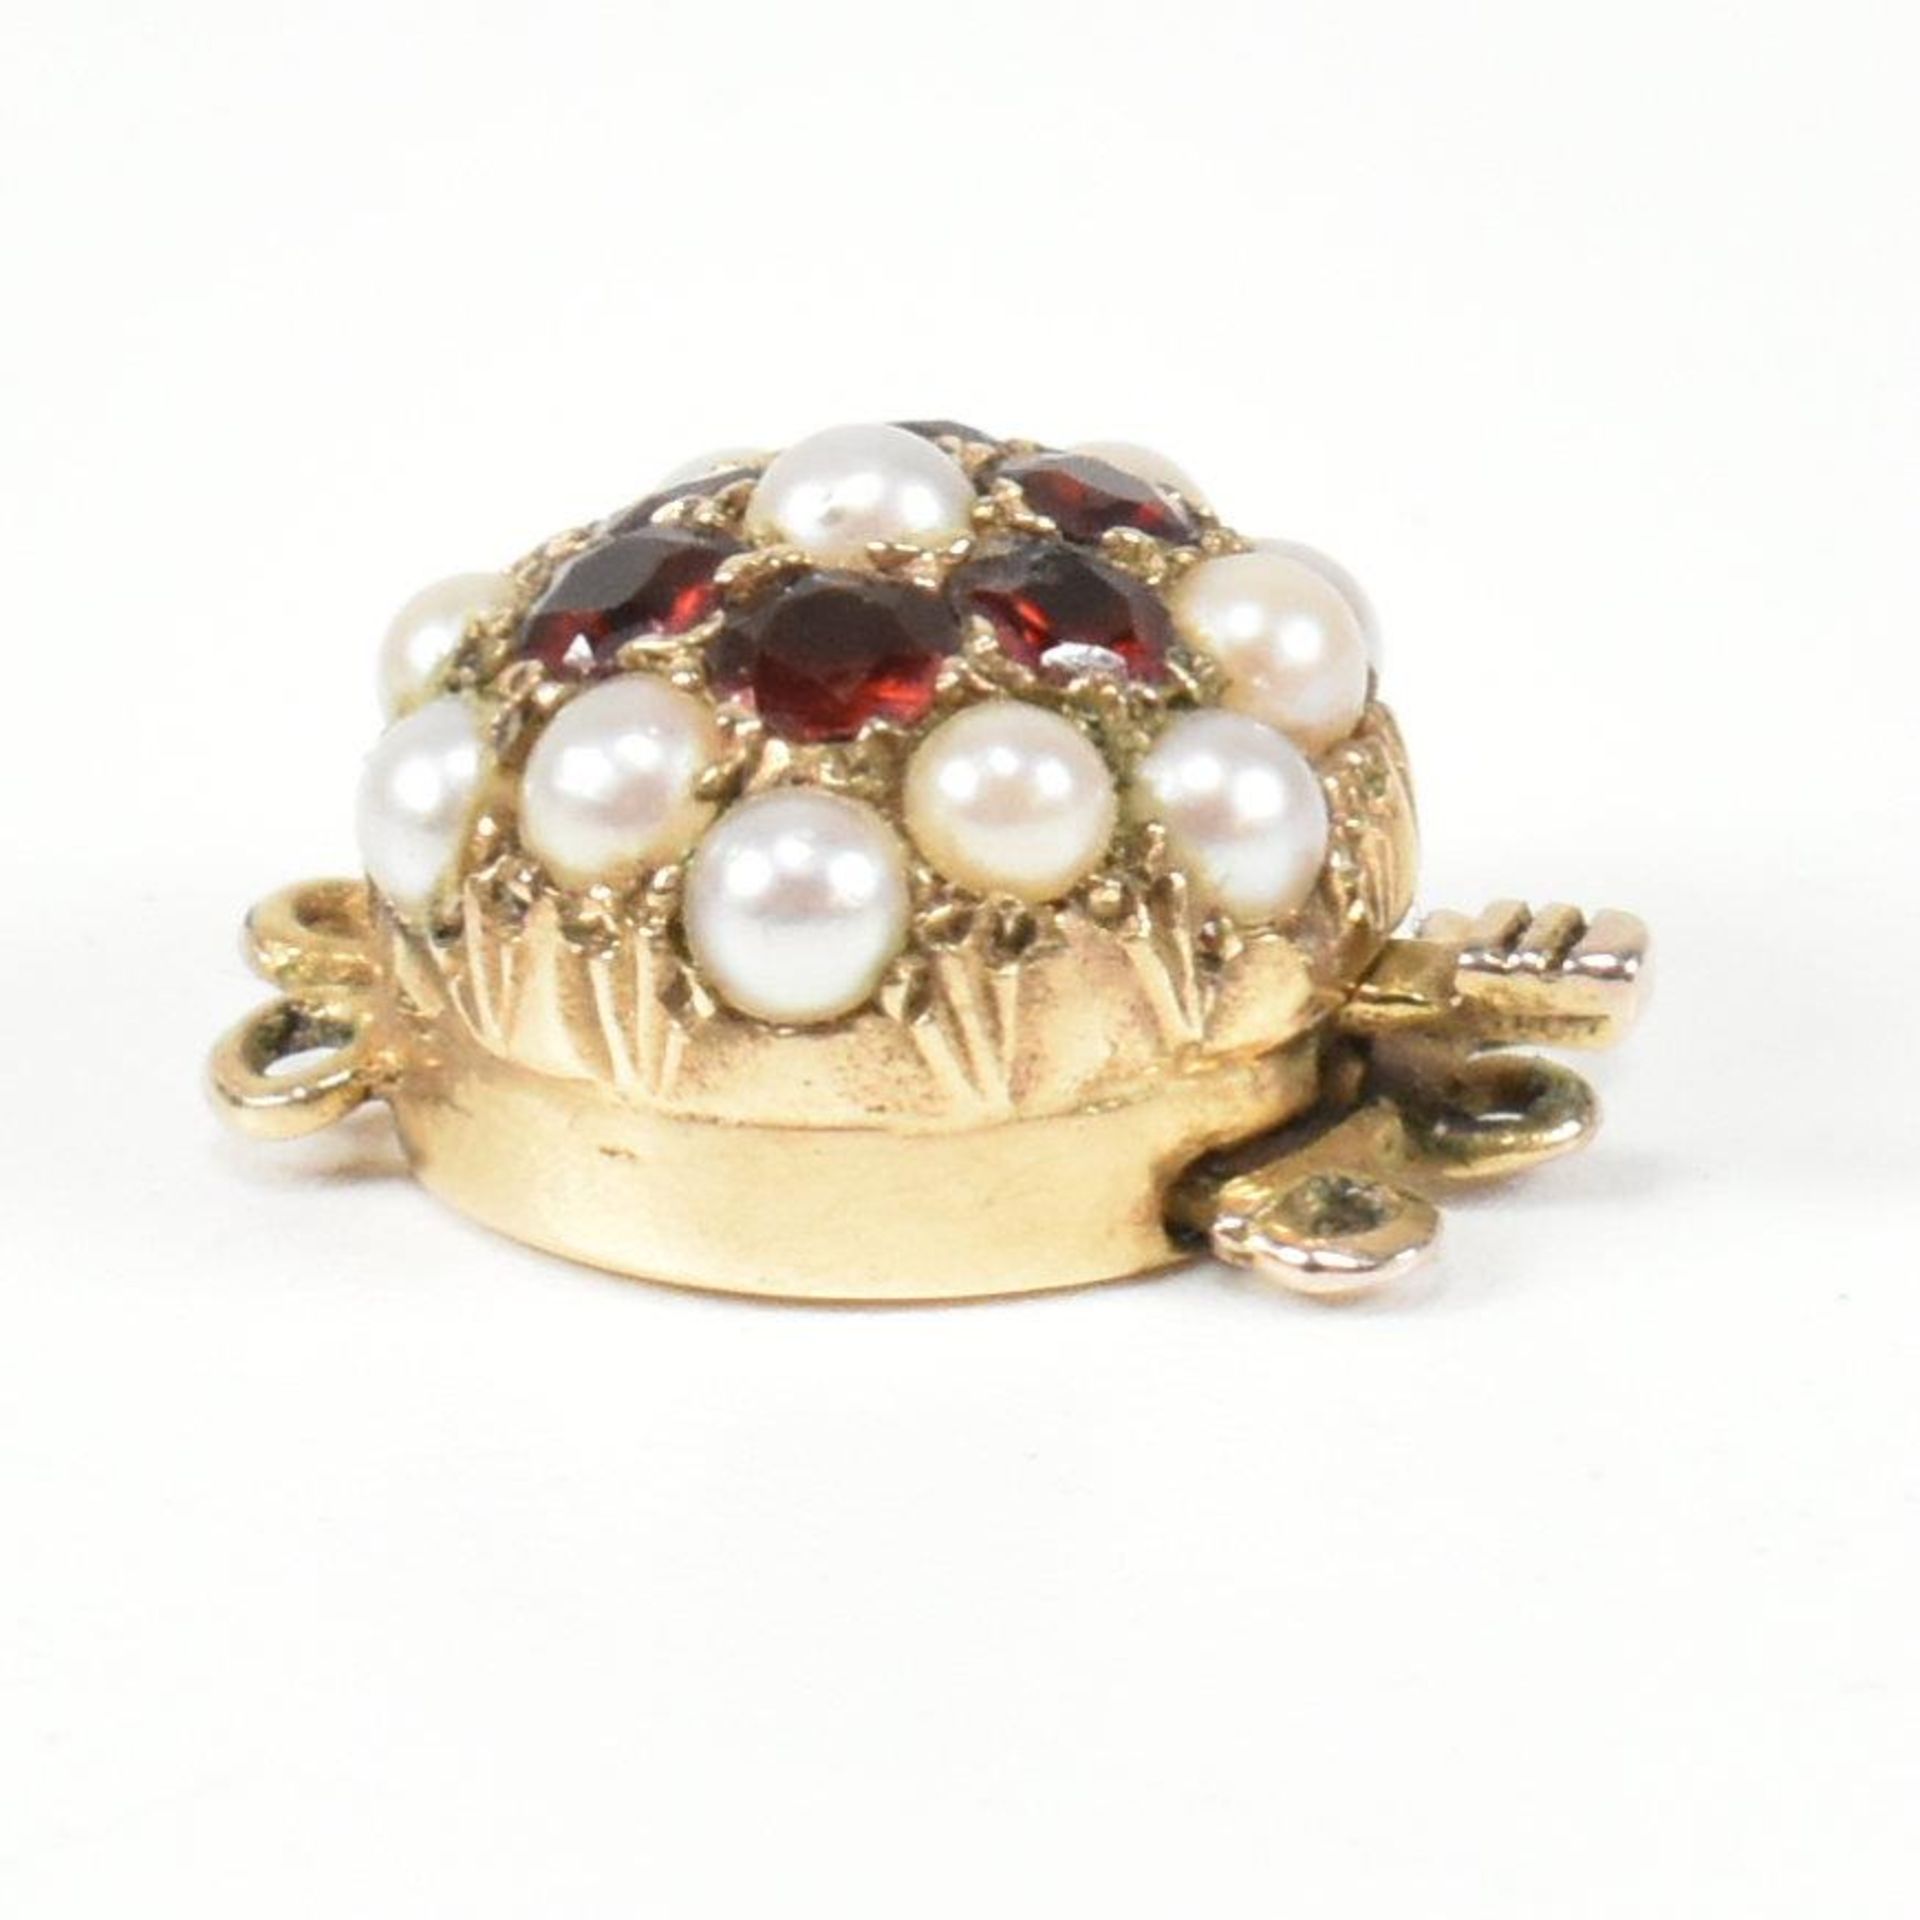 HALLMARKED 9CT GOLD PEARL & GARNET CLUSTER NECKLACE BOX CLASP - Image 5 of 7